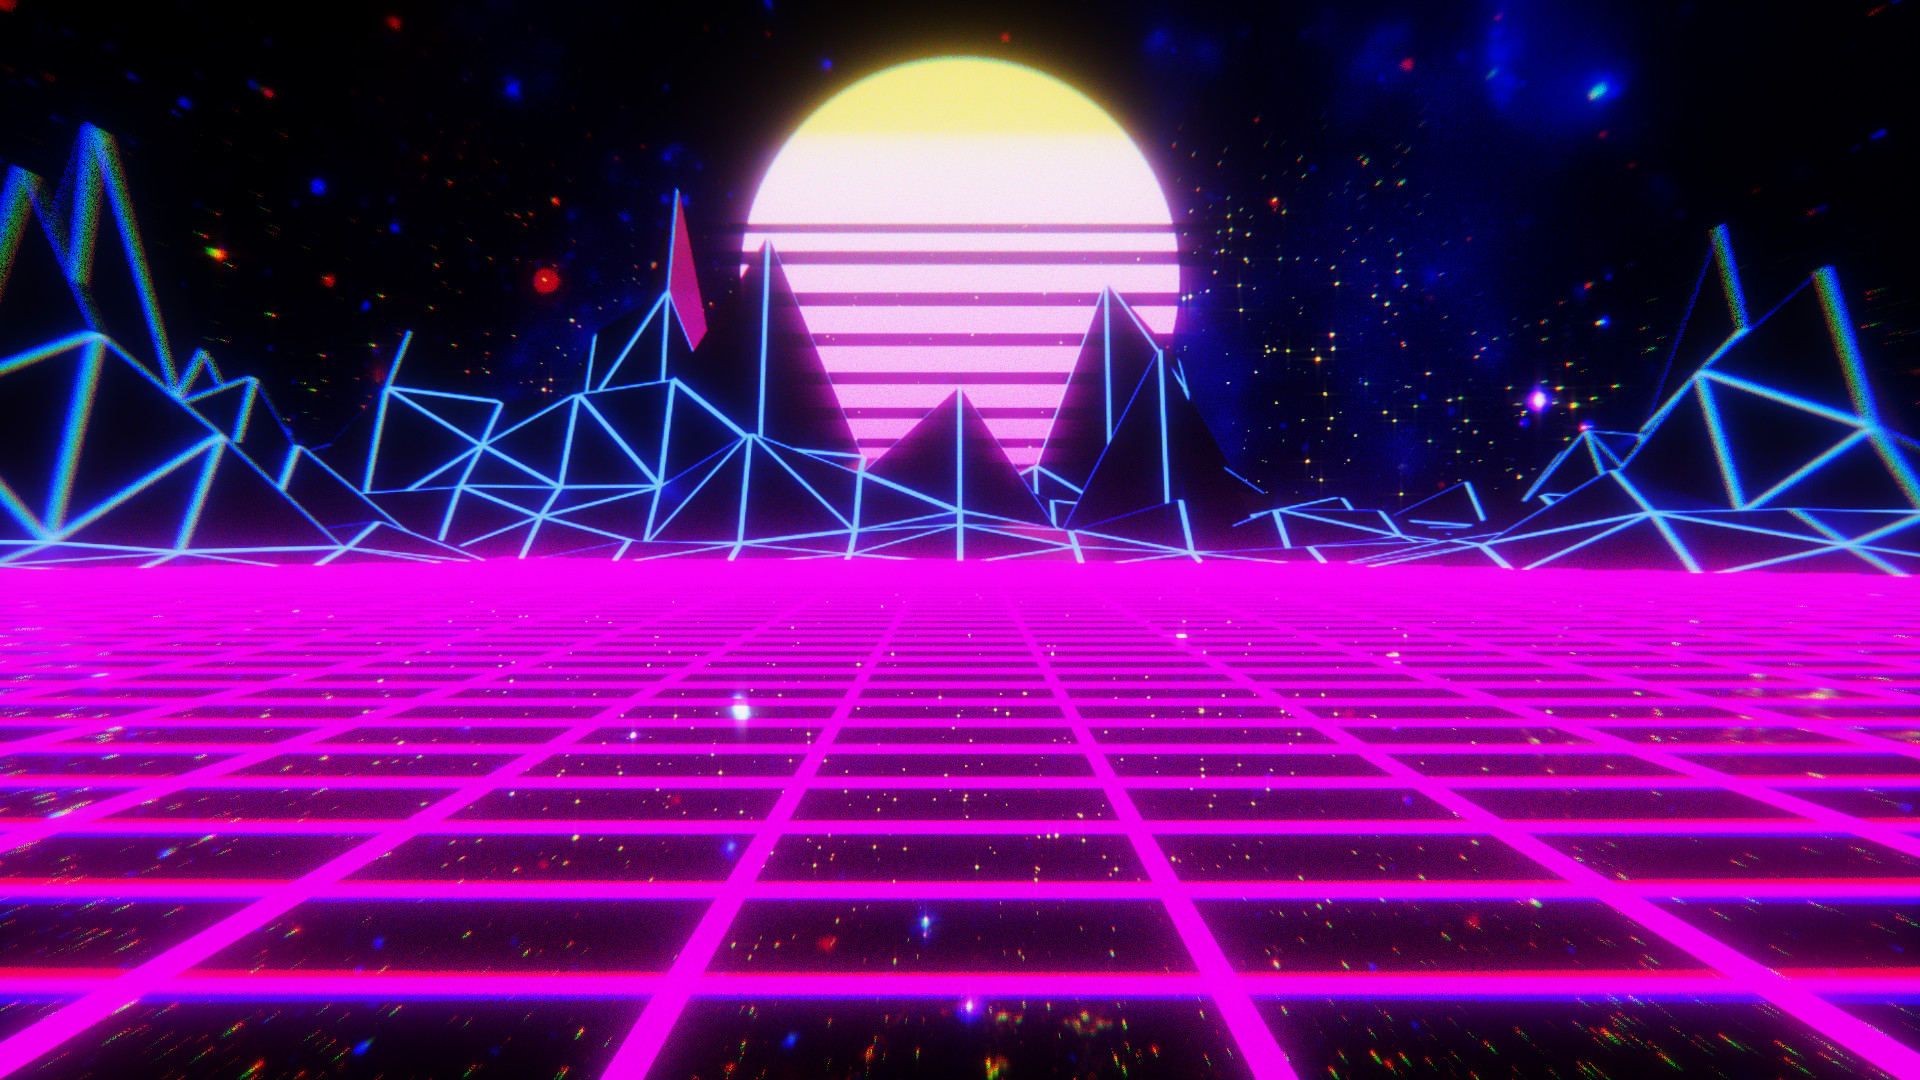 24 Synthwave Computer Wallpapers On Wallpapersafari 